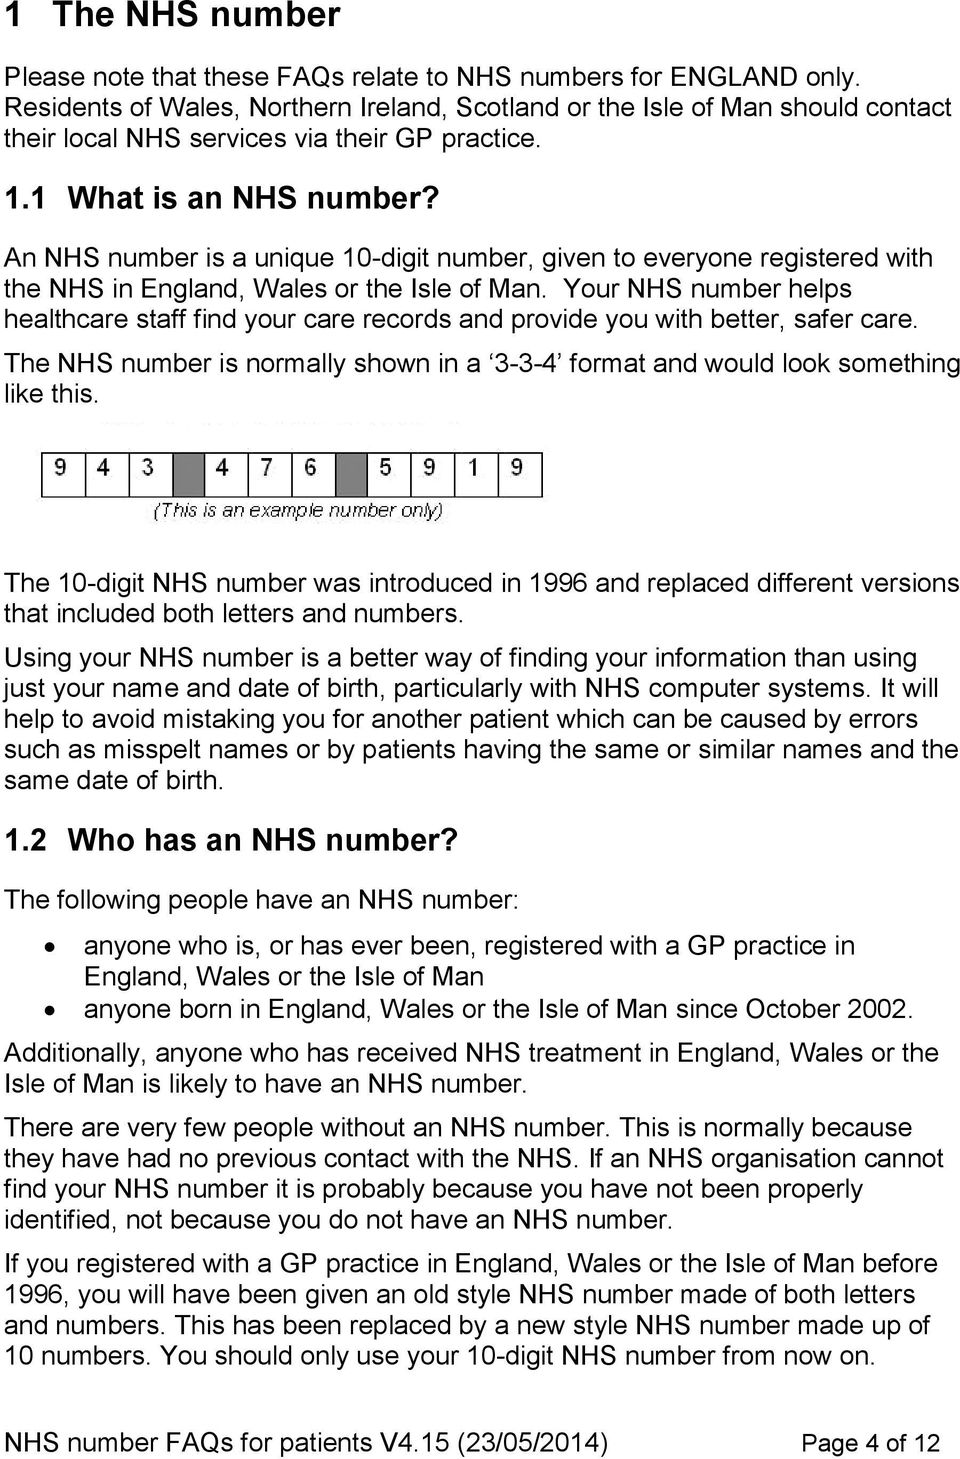 An NHS number is a unique 10-digit number, given to everyone registered with the NHS in England, Wales or the Isle of Man.